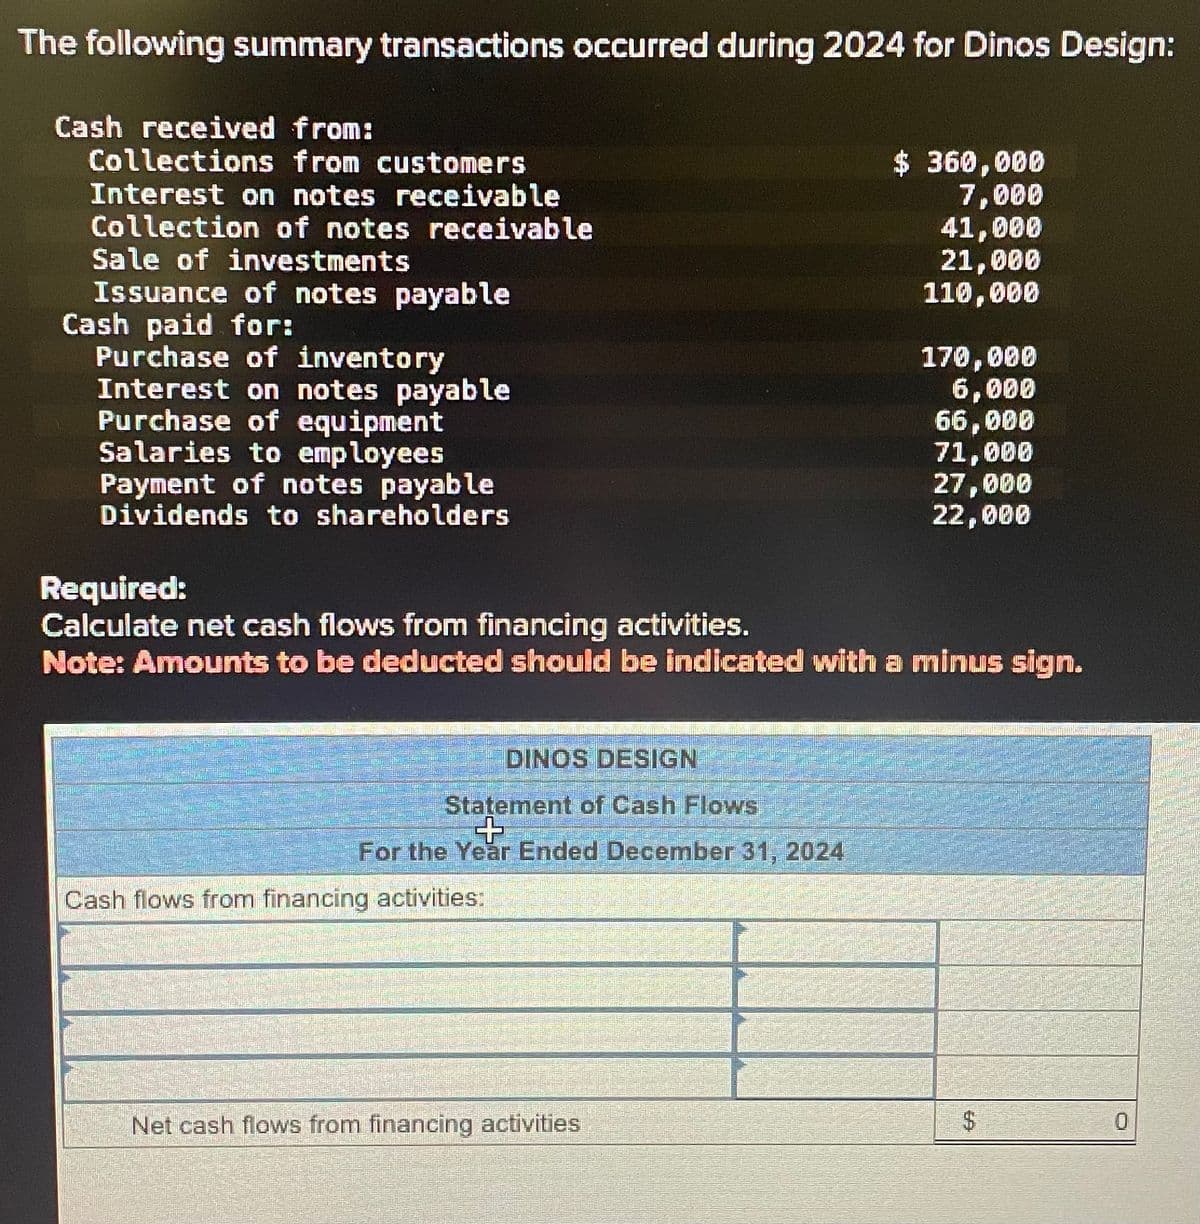 The following summary transactions occurred during 2024 for Dinos Design:
Cash received from:
Collections from customers
Interest on notes receivable
Collection of notes receivable
Sale of investments
Issuance of notes payable
Cash paid for:
Purchase of inventory
Interest on notes payable
Purchase of equipment
Salaries to employees
Payment of notes payable
Dividends to shareholders
DINOS DESIGN
Statement of Cash Flows
+
For the Year Ended December 31, 2024
Required:
Calculate net cash flows from financing activities.
Note: Amounts to be deducted should be indicated with a minus sign.
Cash flows from financing activities:
$360,000
7,000
41,000
21,000
110,000
Net cash flows from financing activities
170,000
6,000
66,000
71,000
27,000
22,000
$
0